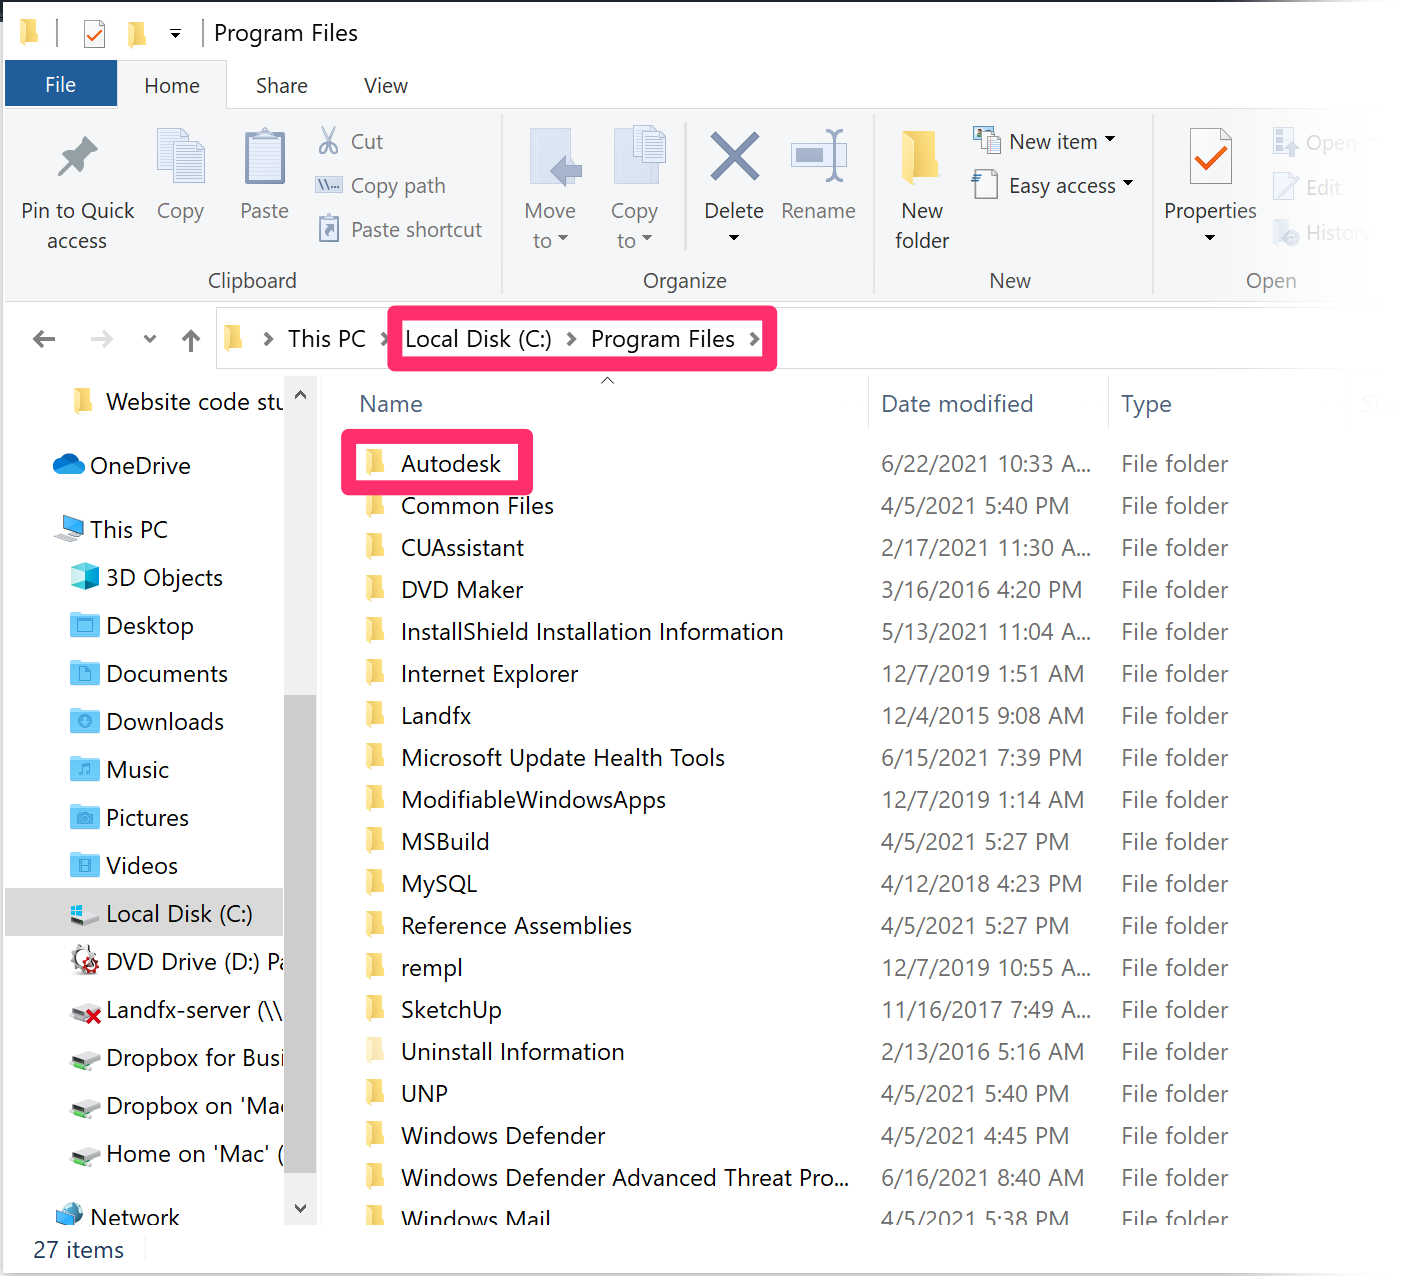 Navigating to a folder path in the Winodws Explorer